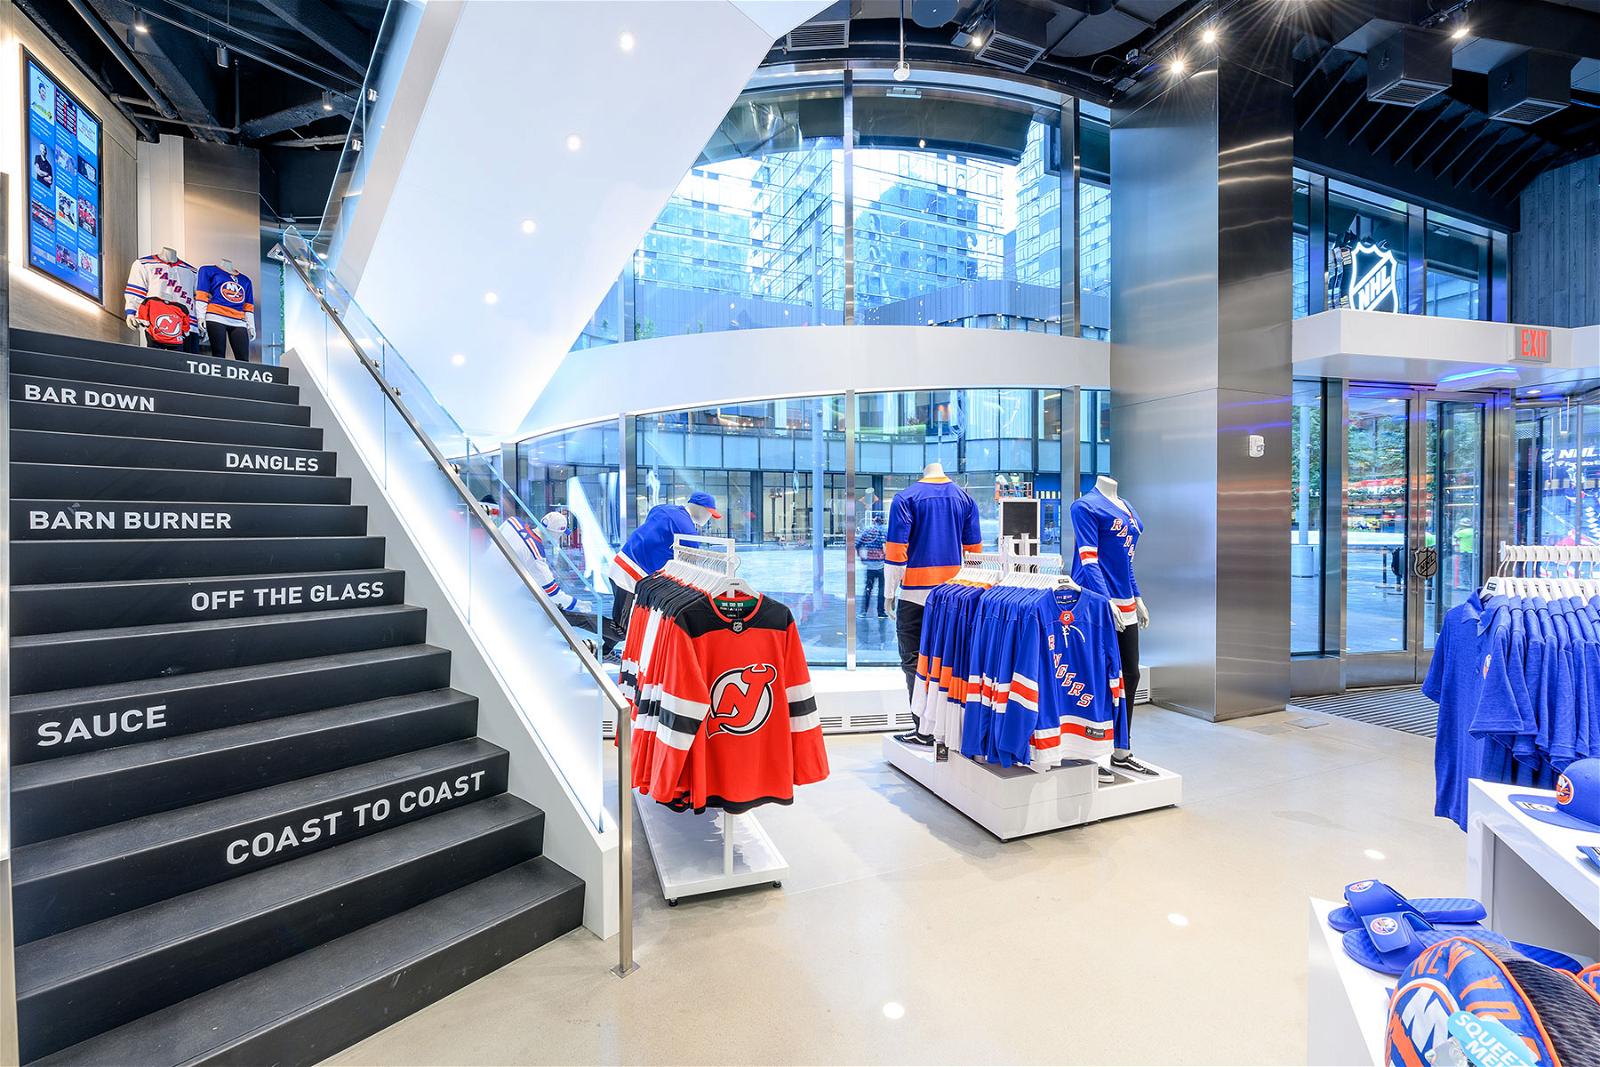 NHL Shop (@officialnhlshop) • Instagram photos and videos